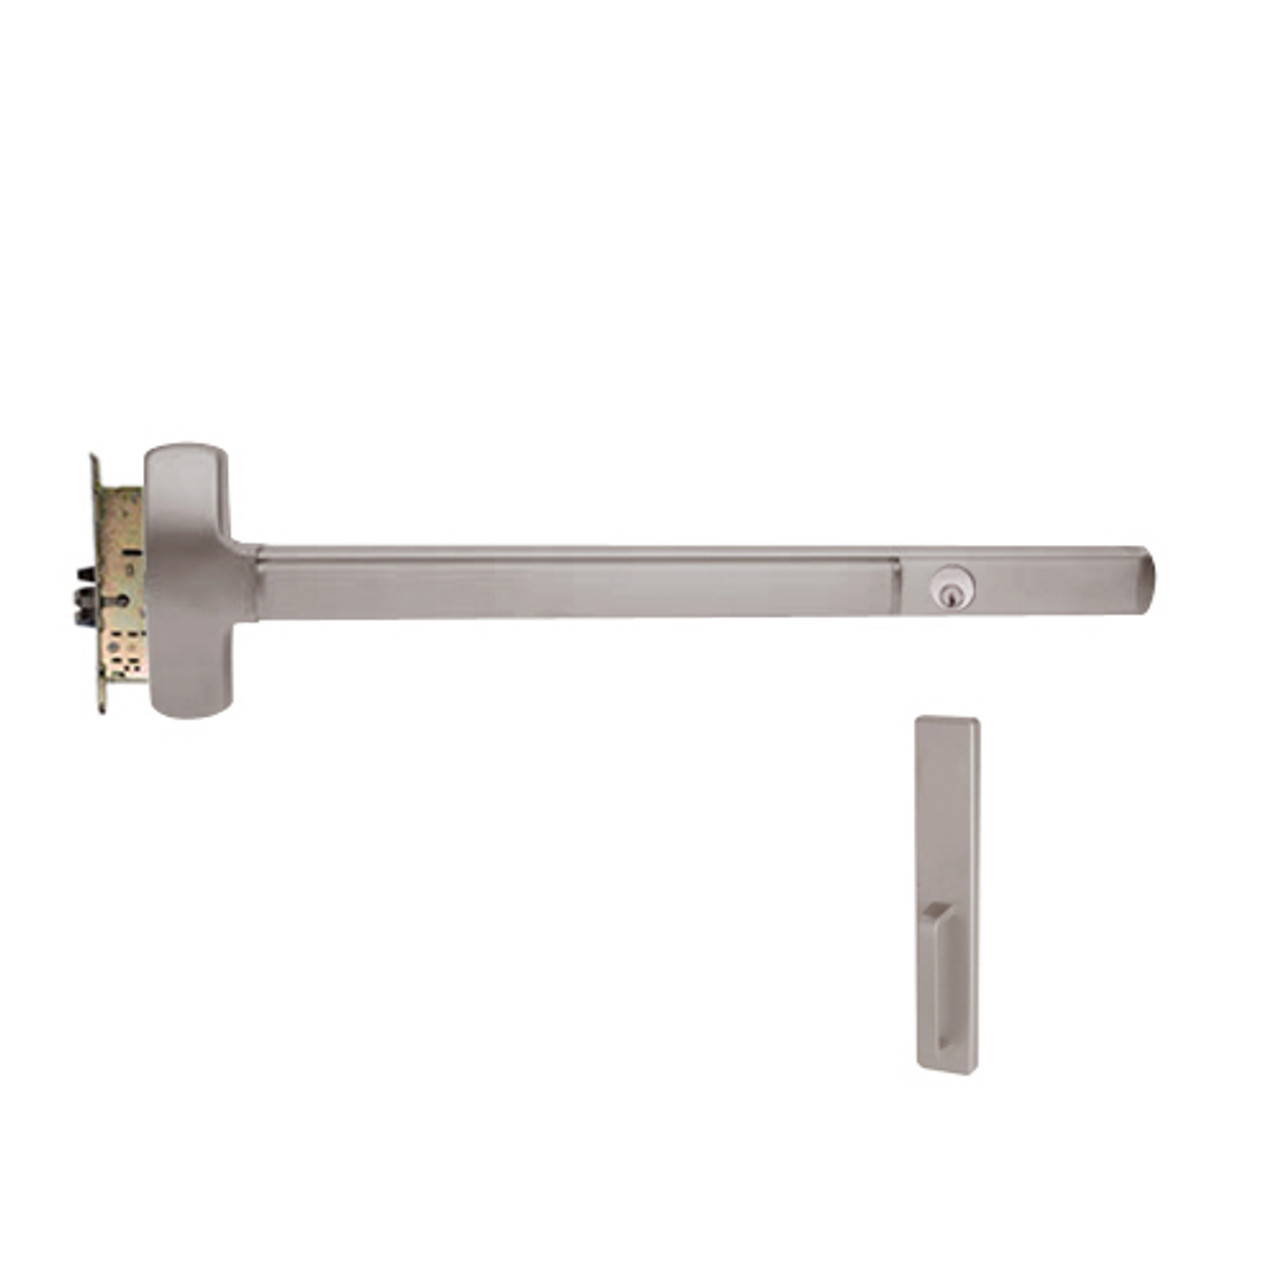 CD25-M-DT-US28-3-LHR Falcon Exit Device in Anodized Aluminum